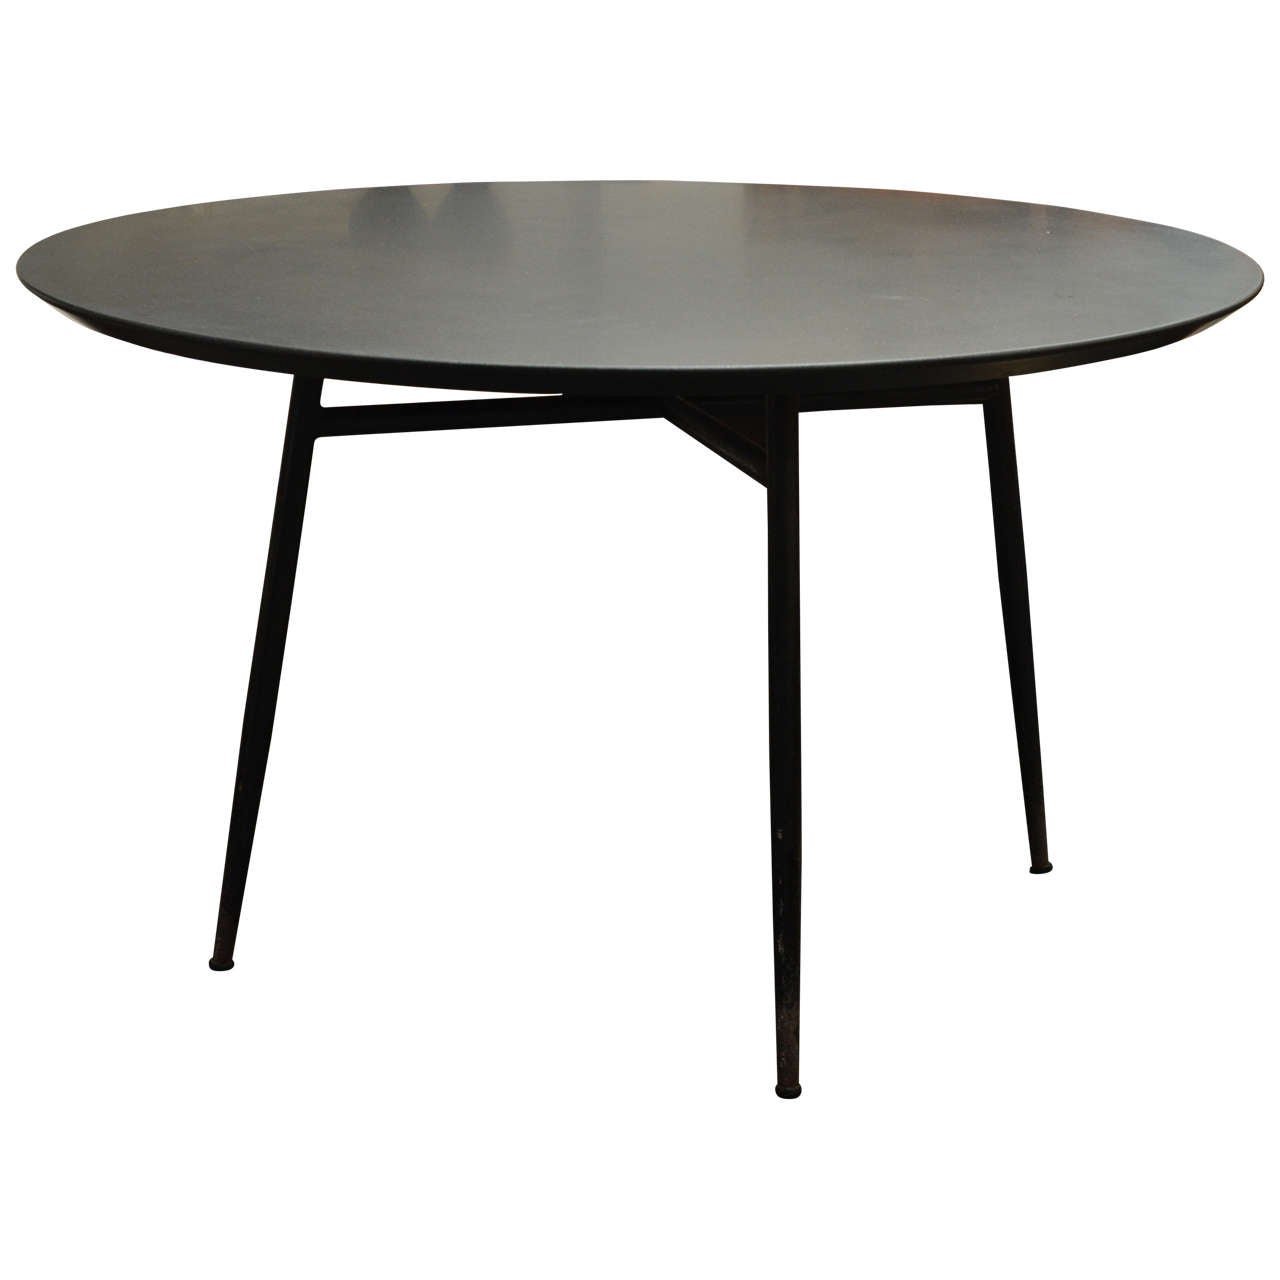 French Industrial Table Base with Contemporary Granite Top